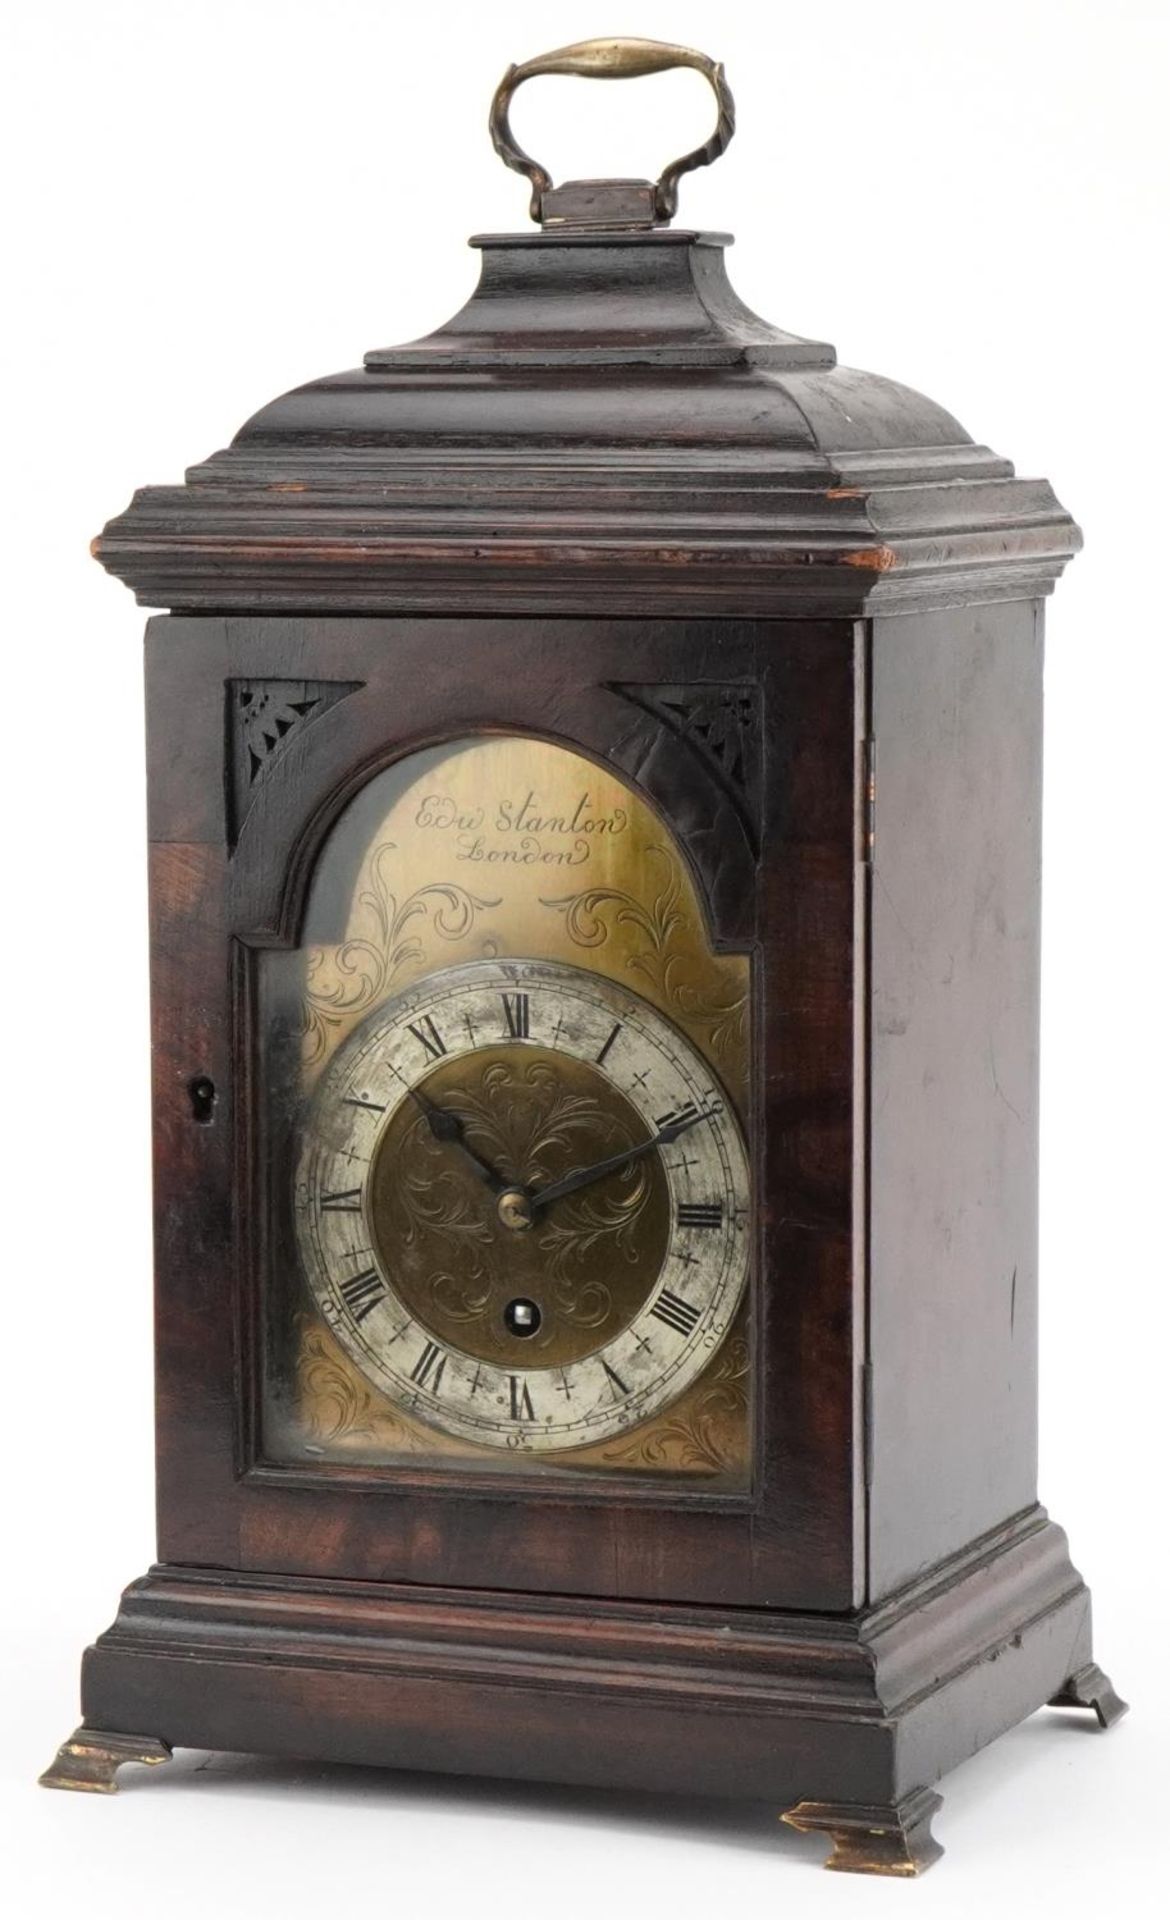 Edward Stanton of London, antique mahogany bracket clock with floral chased brass face and